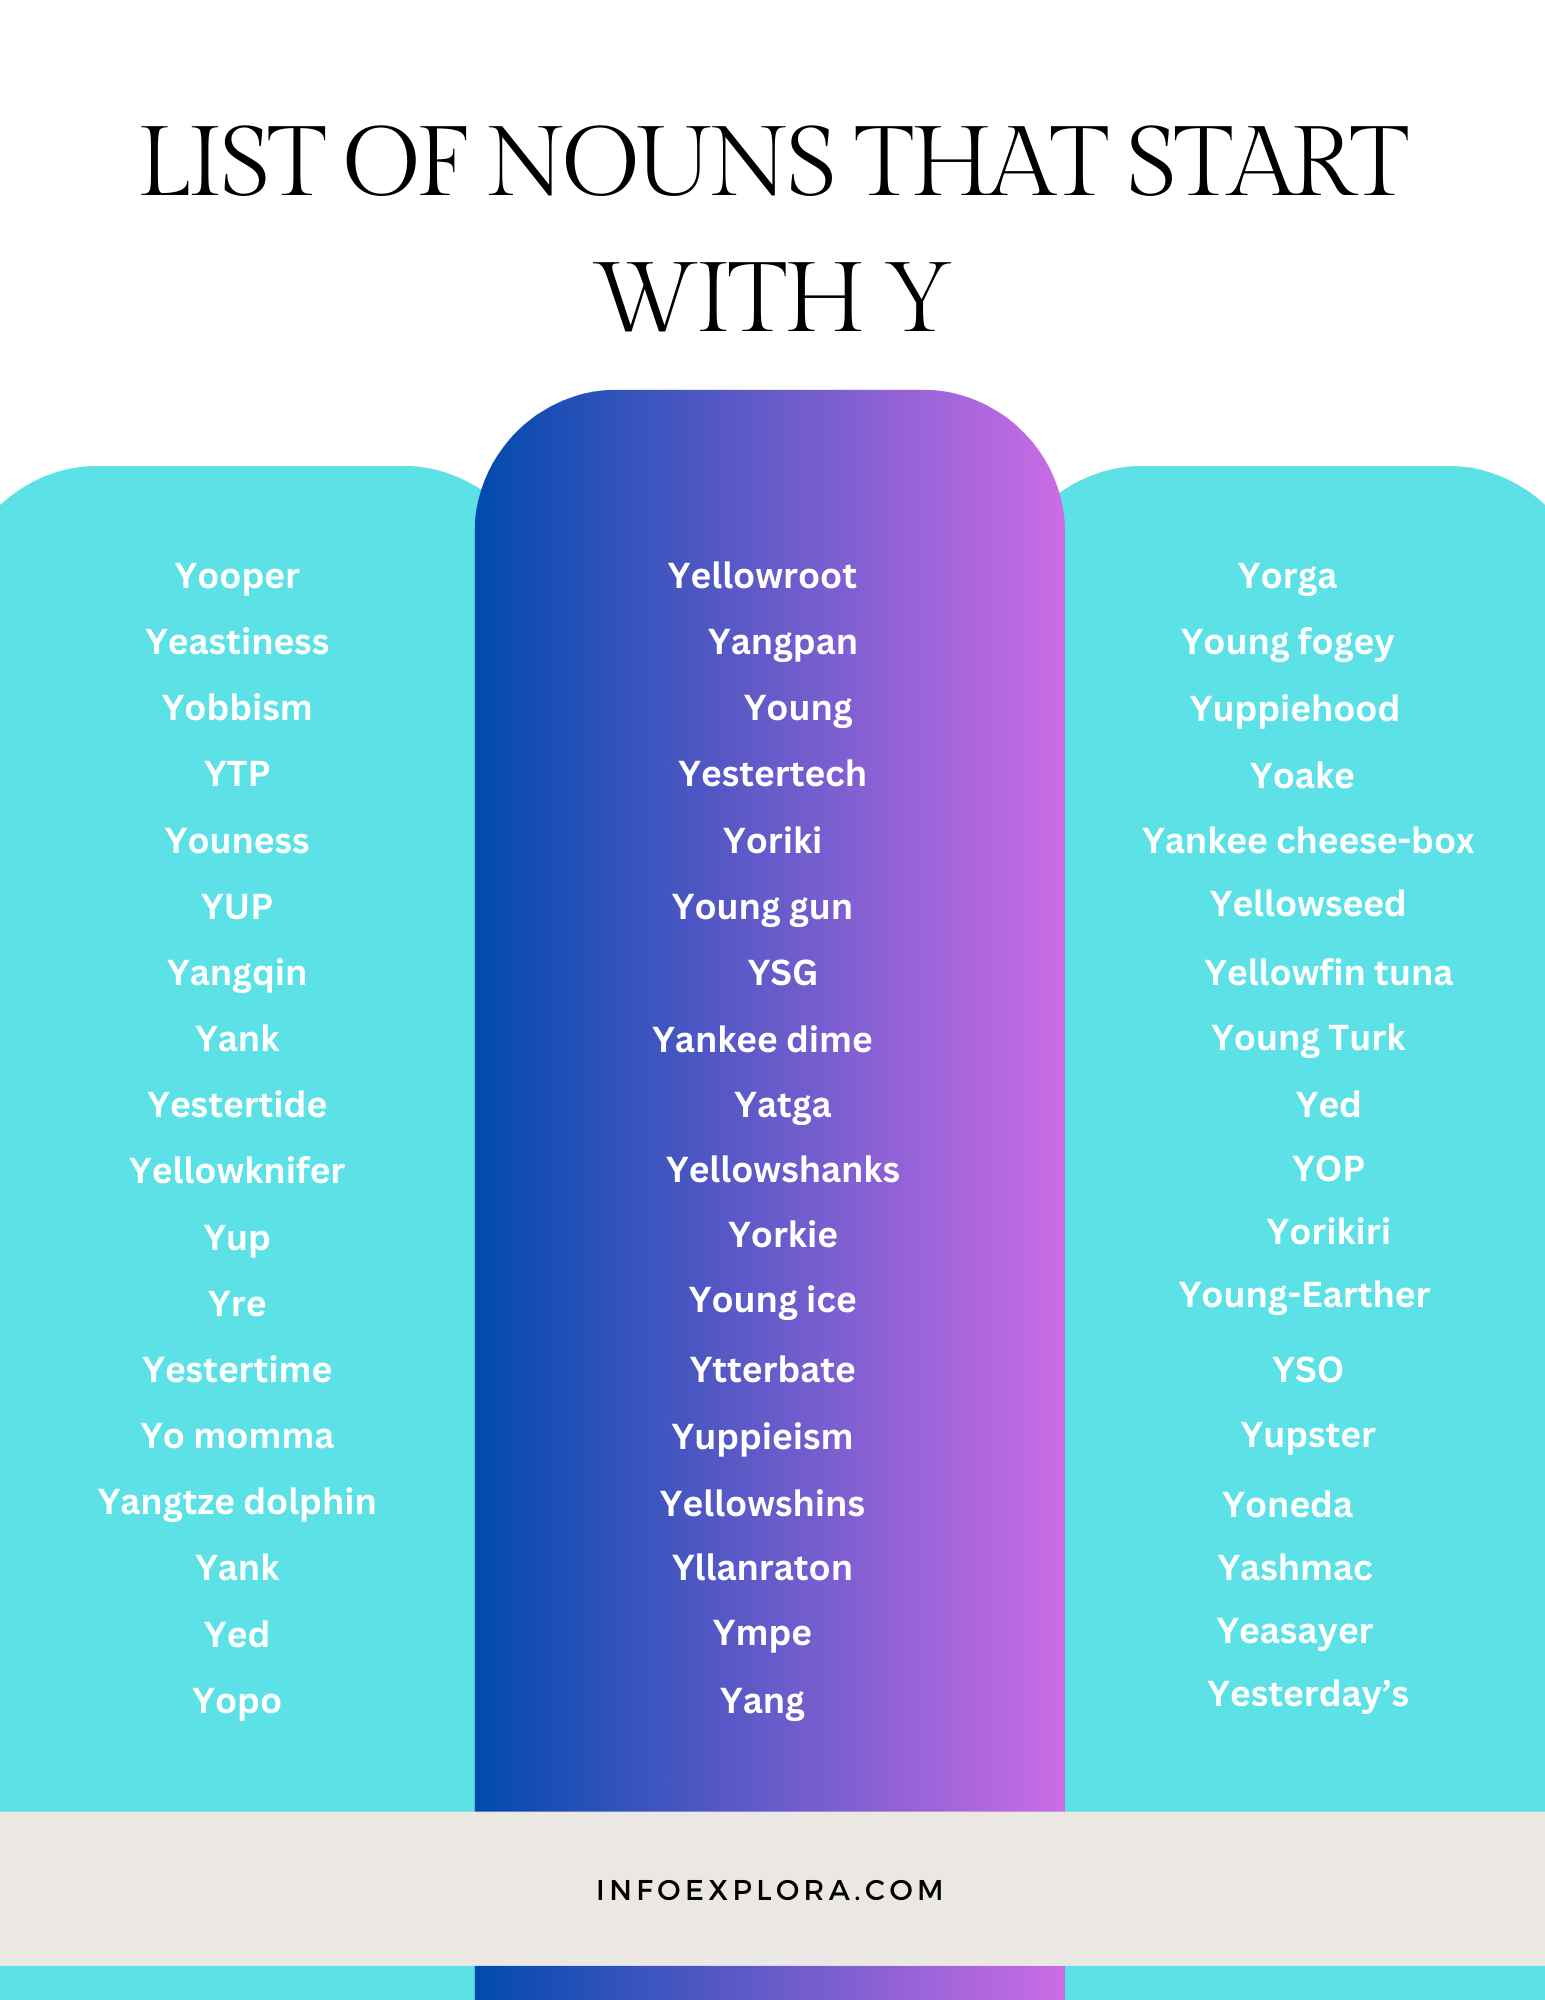 List of Nouns that Start With Y